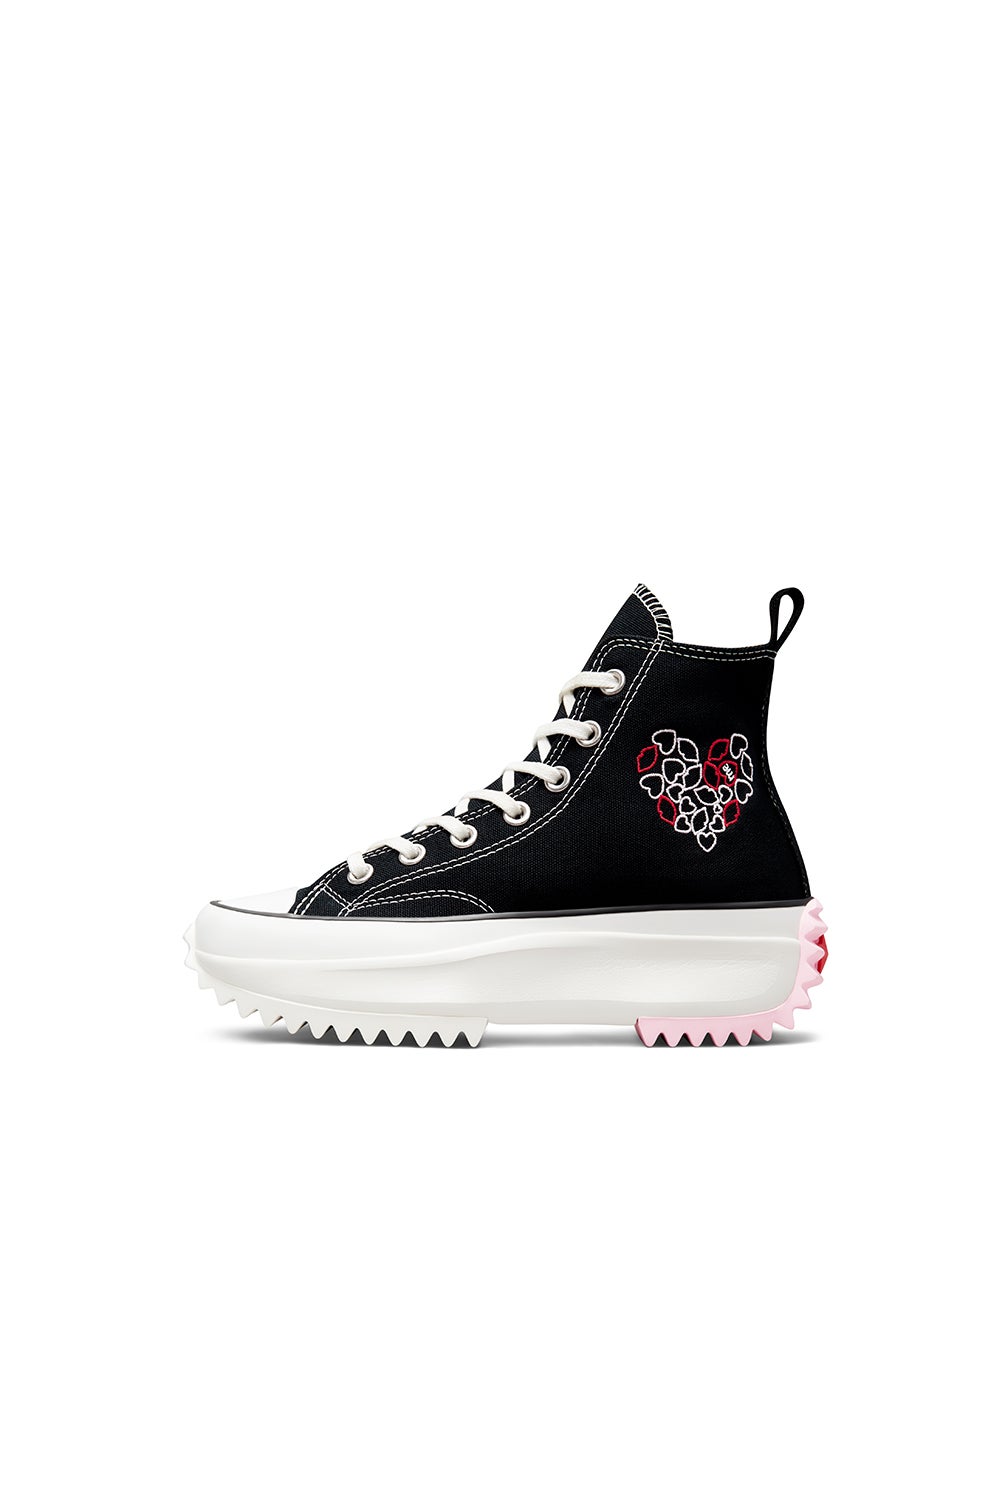 Converse Run Star Hike Crafted with Love High Top Black